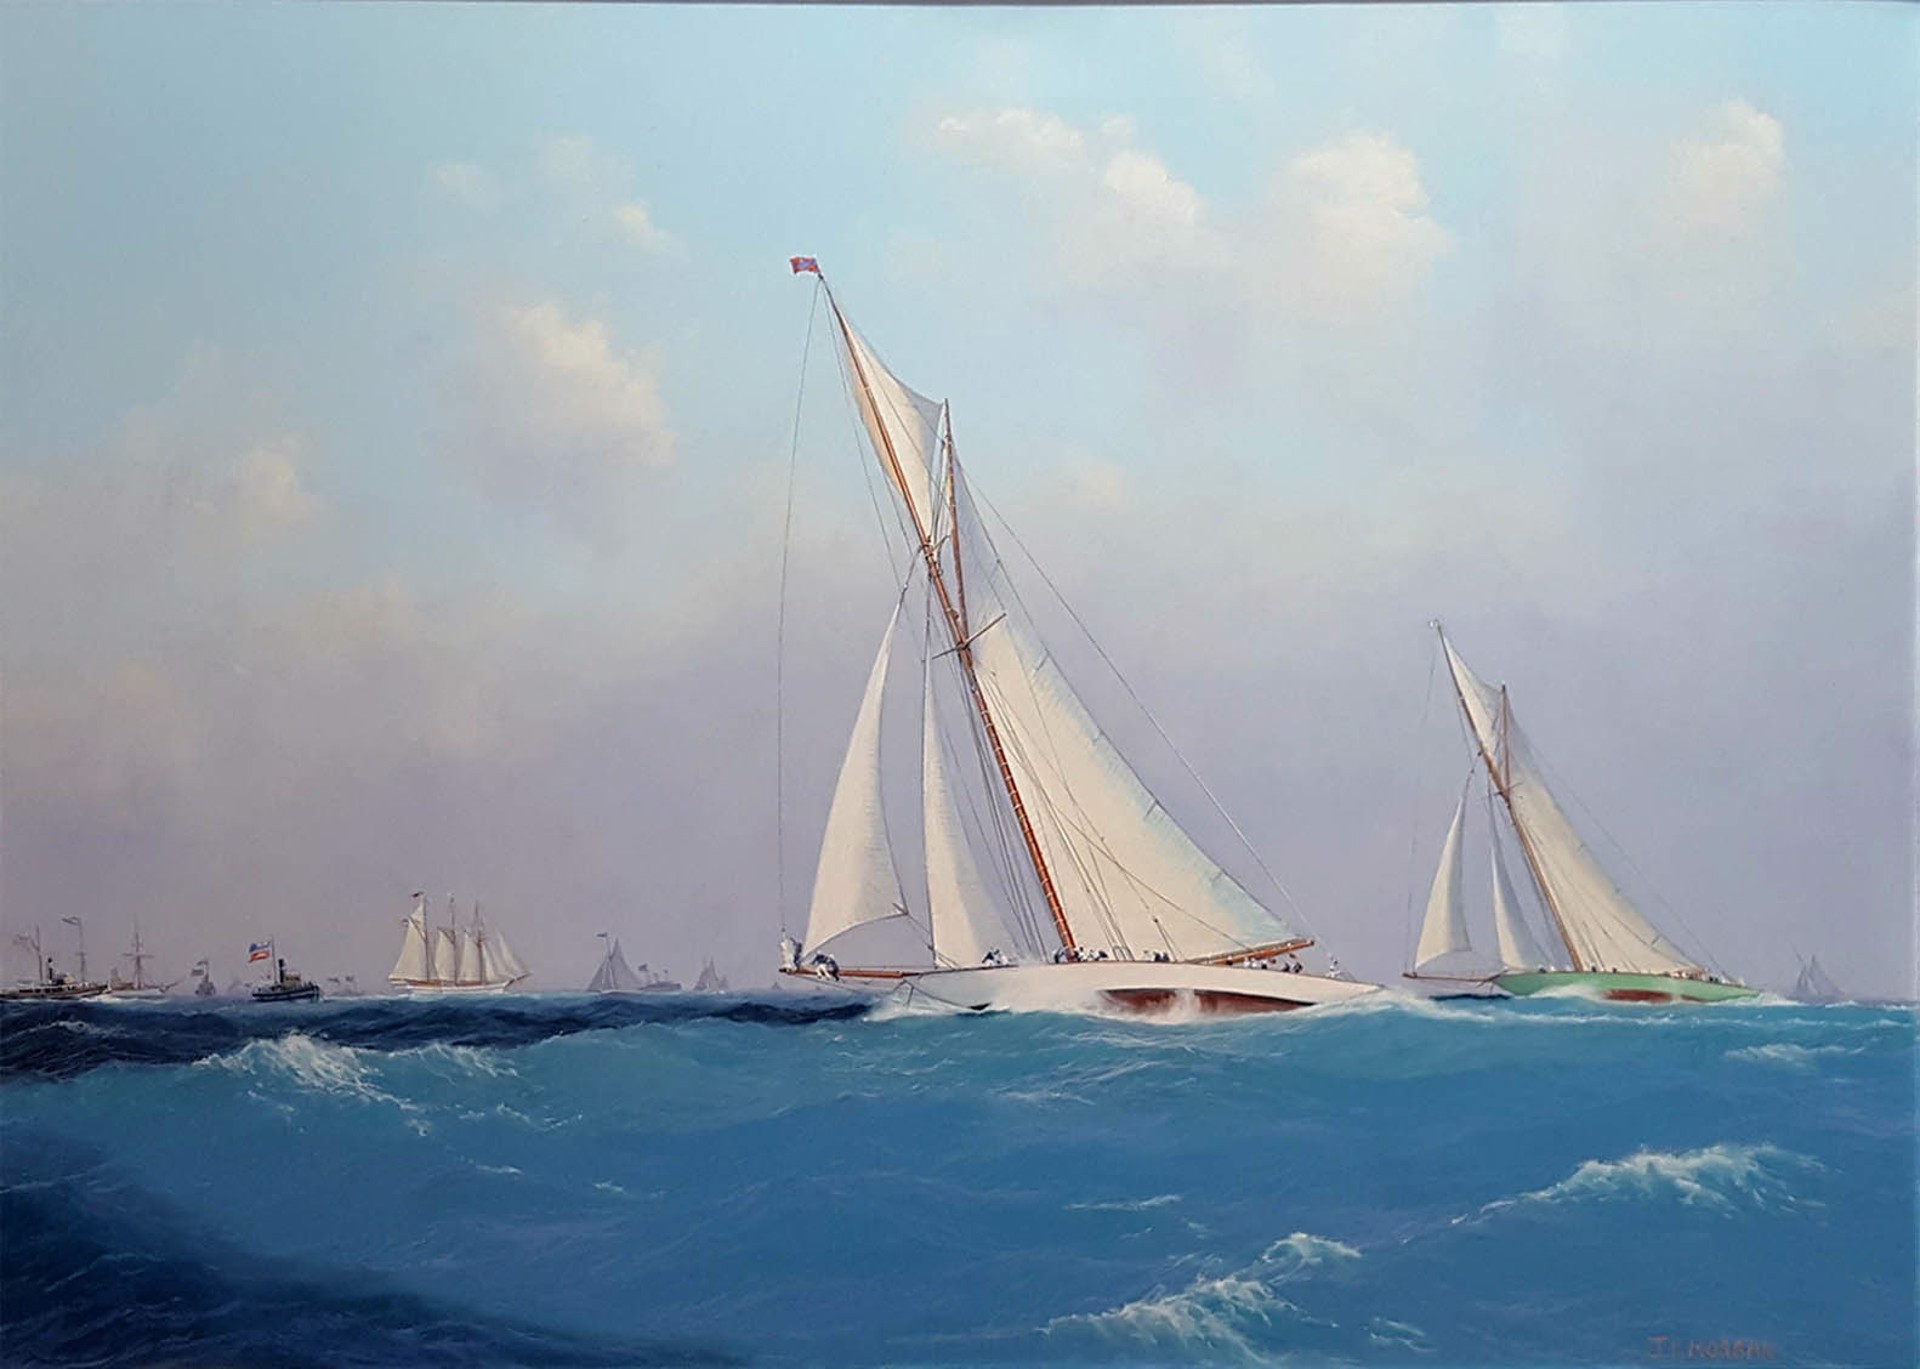 THE COLUMBIA FORGES AHEAD - THE AMERICA'S CUP 1899 by Jenny Morgan, RSMA